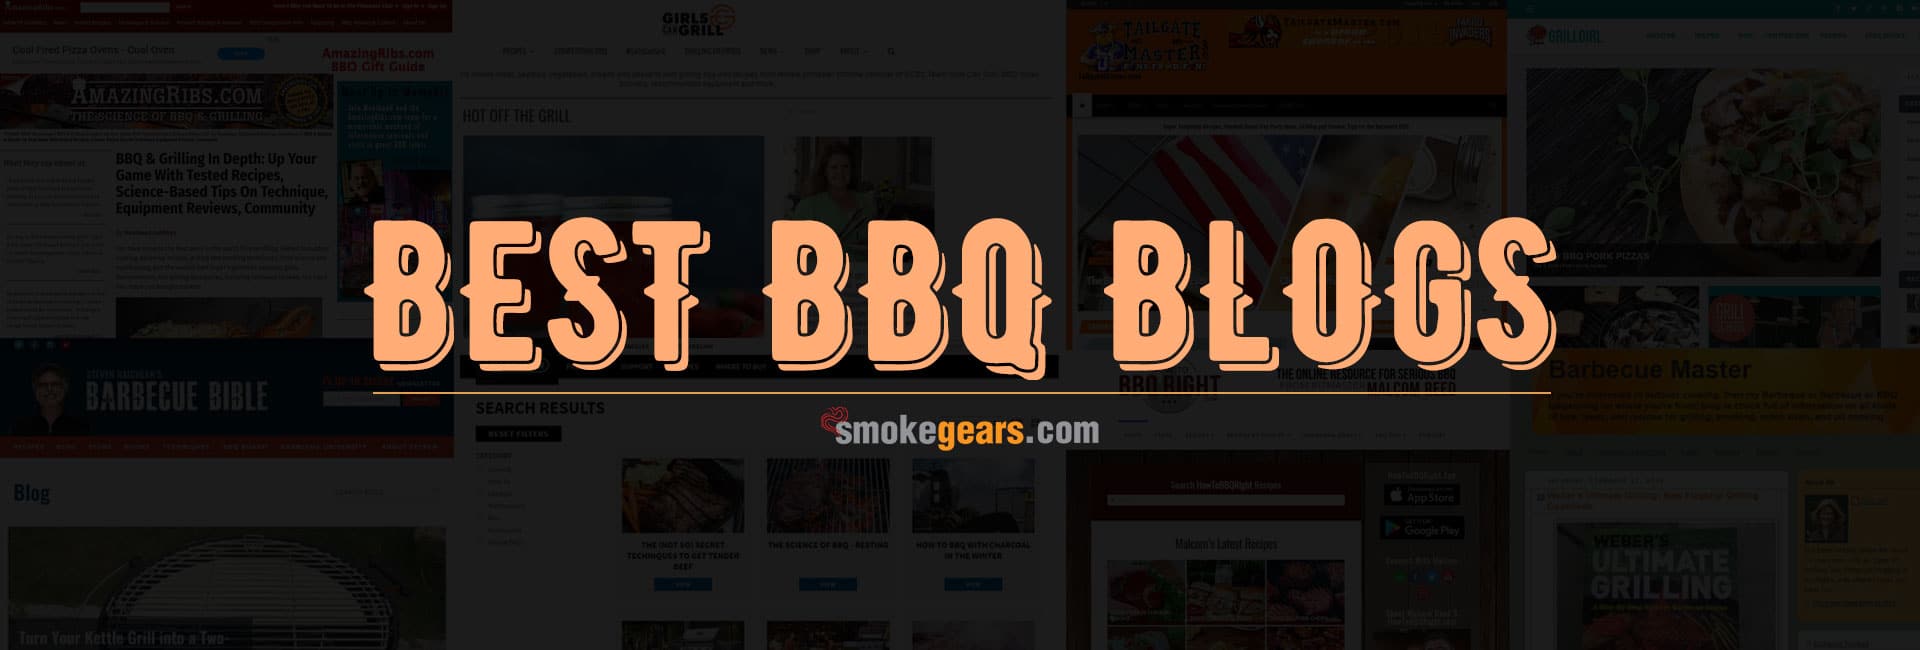 Best Barbecue Blogs